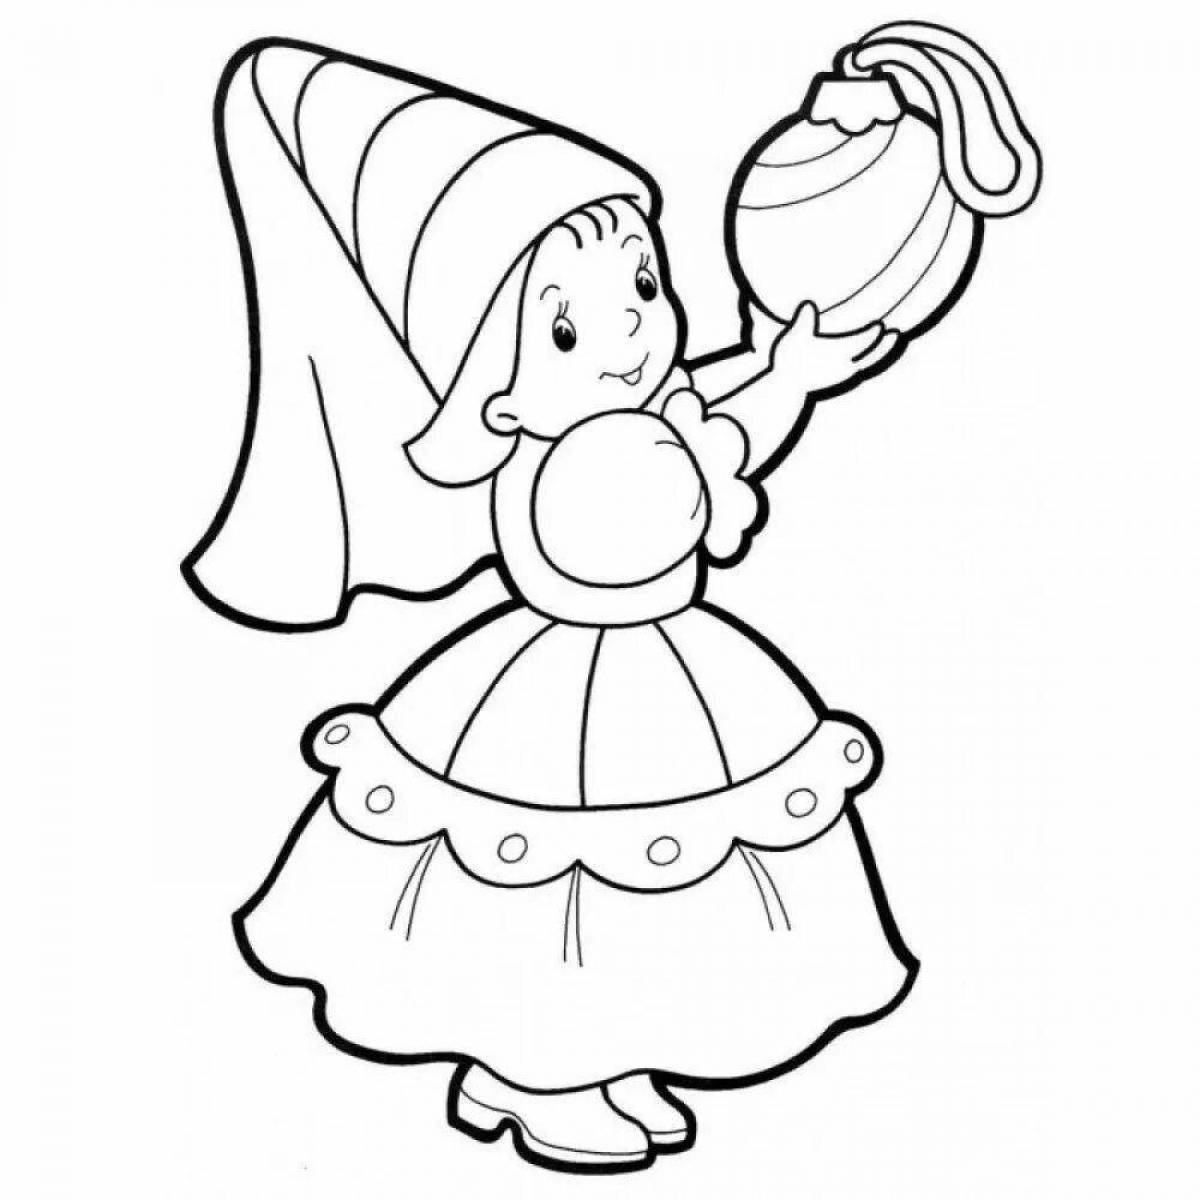 The craziest toy coloring pages for girls